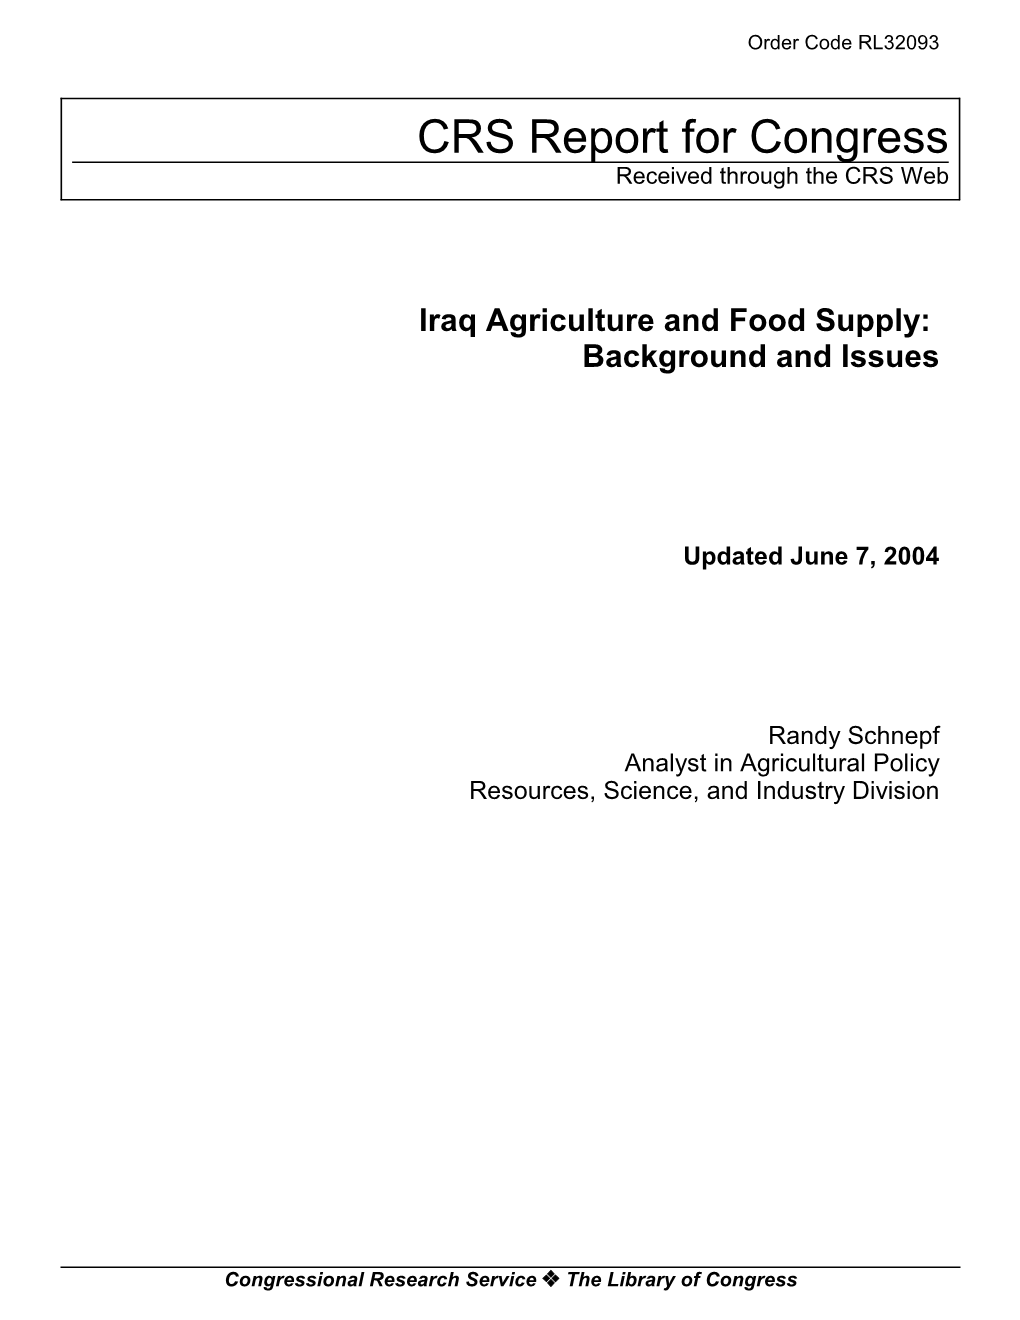 Iraq Agriculture and Food Supply: Background and Issues